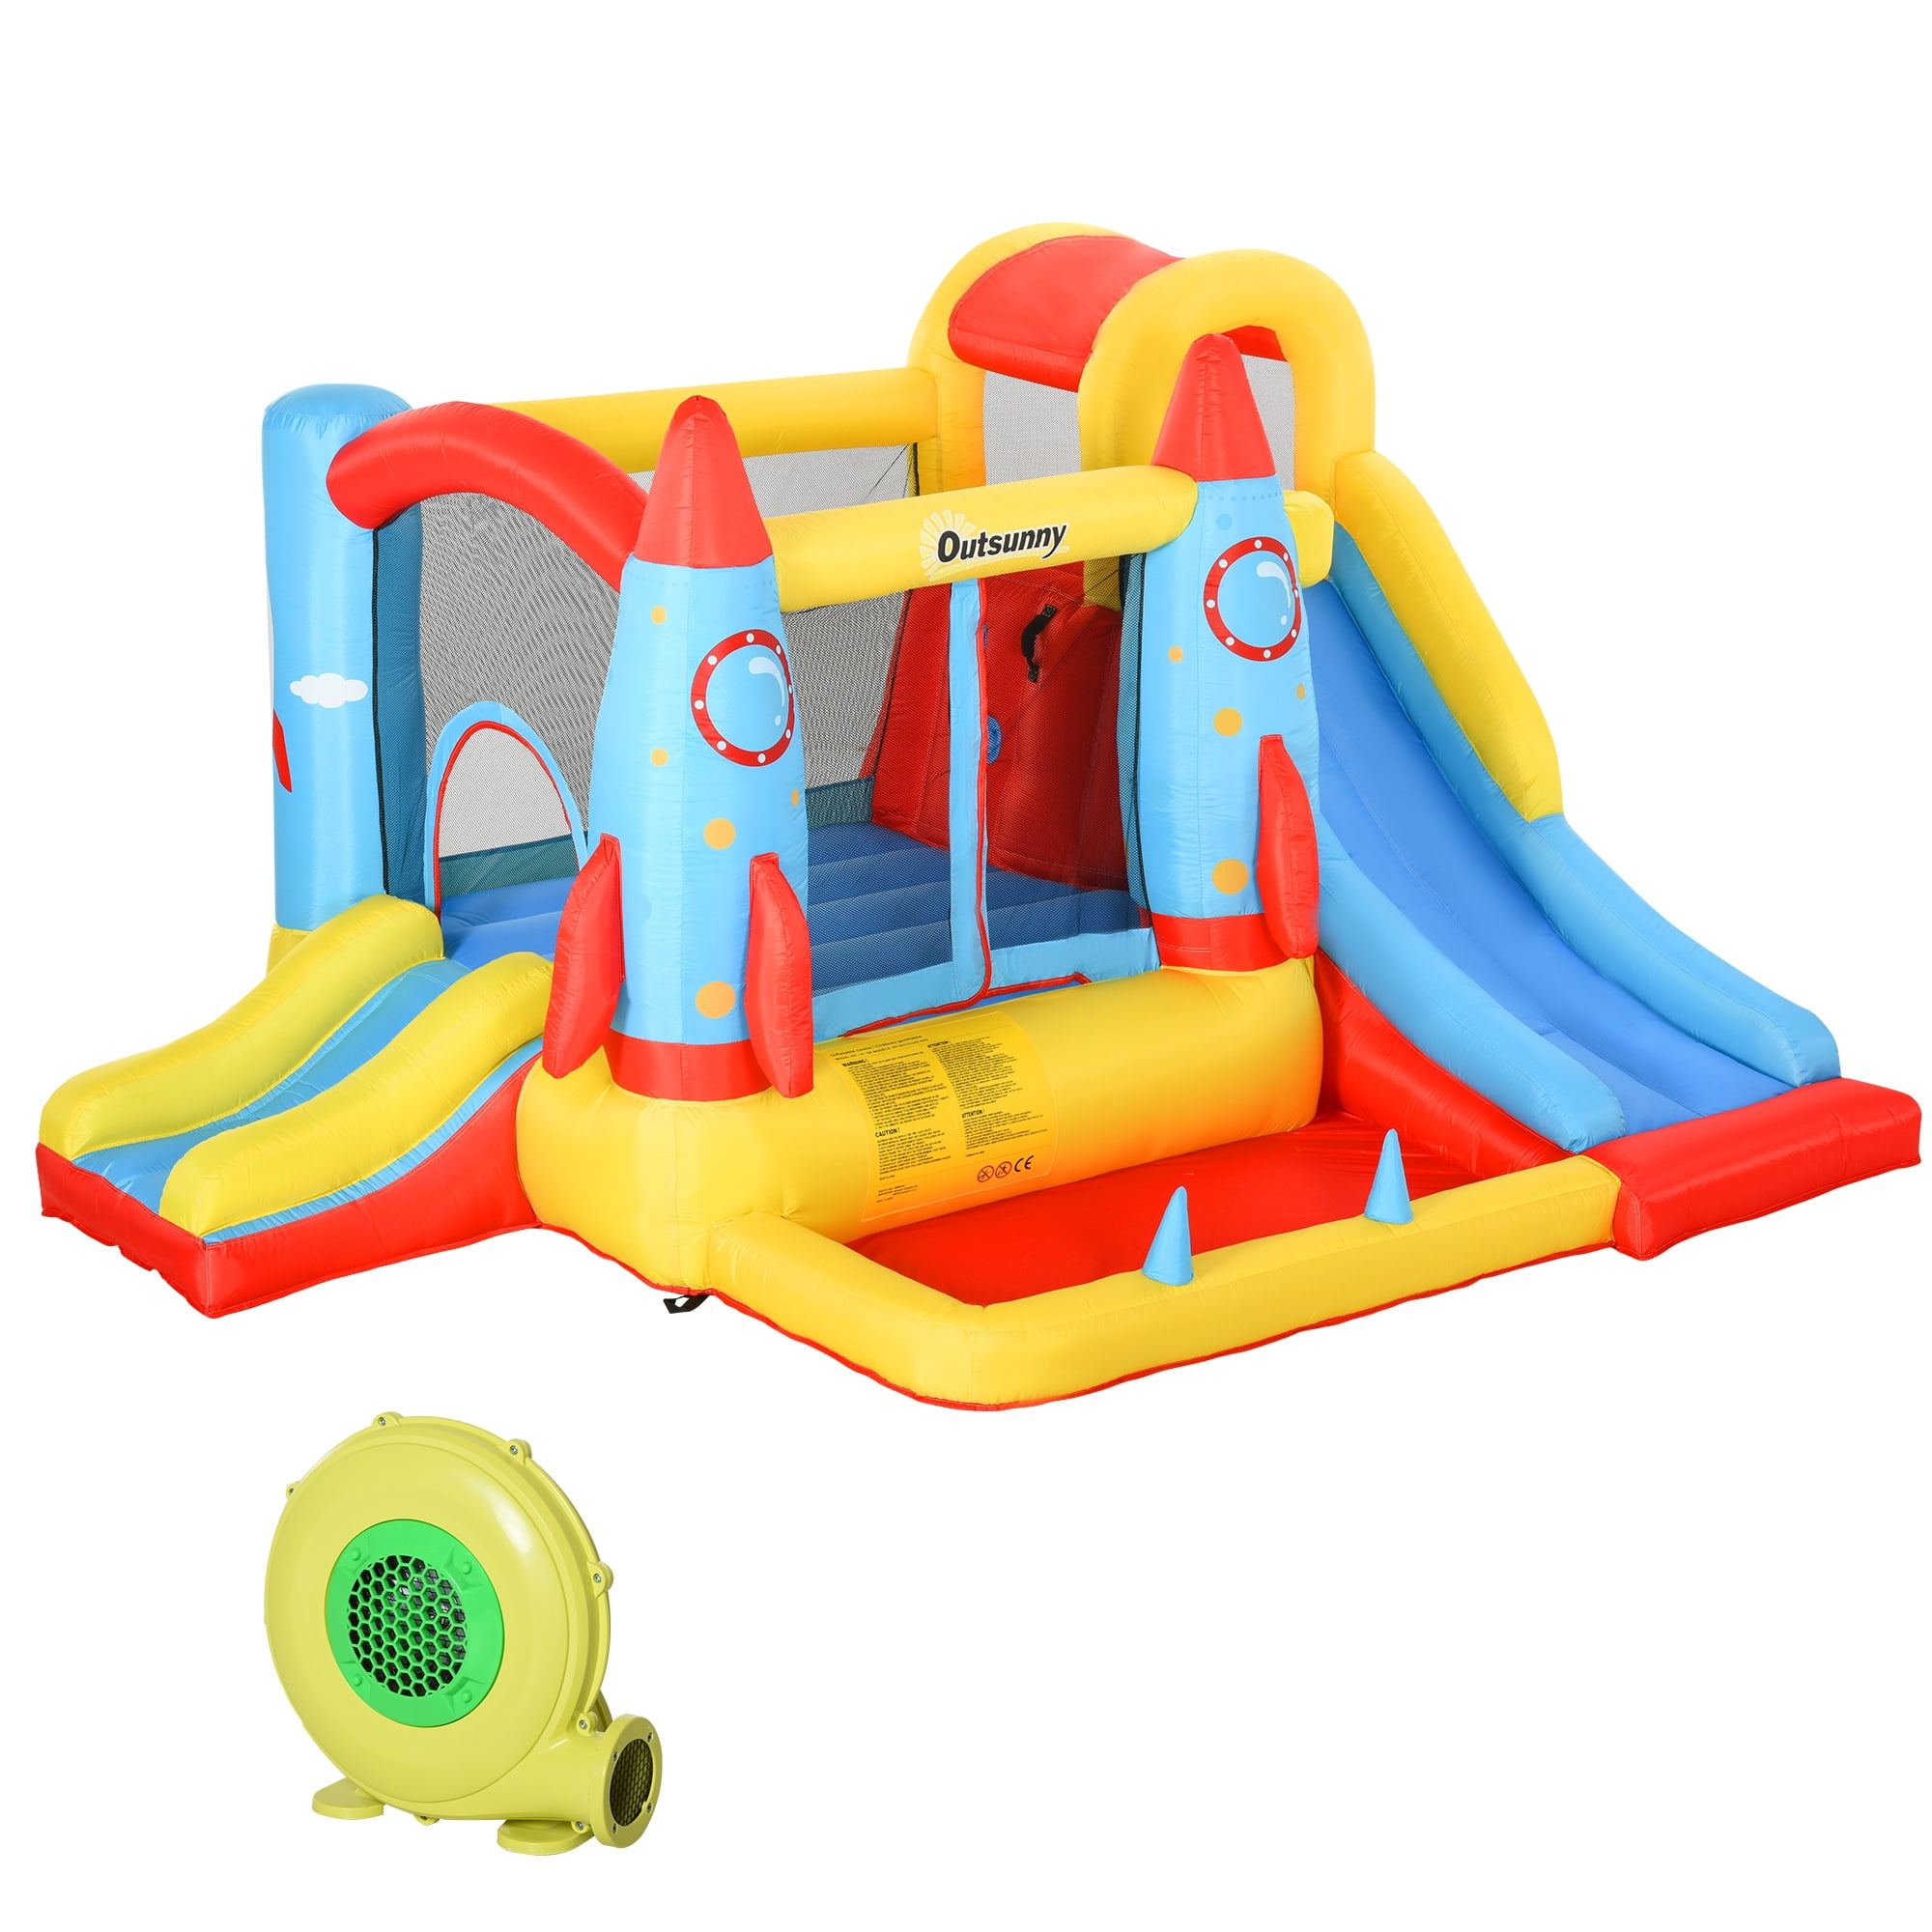 Blower Included Kids Fun Funhouse Jump Inflatable 9.5ft with Padding Pool 